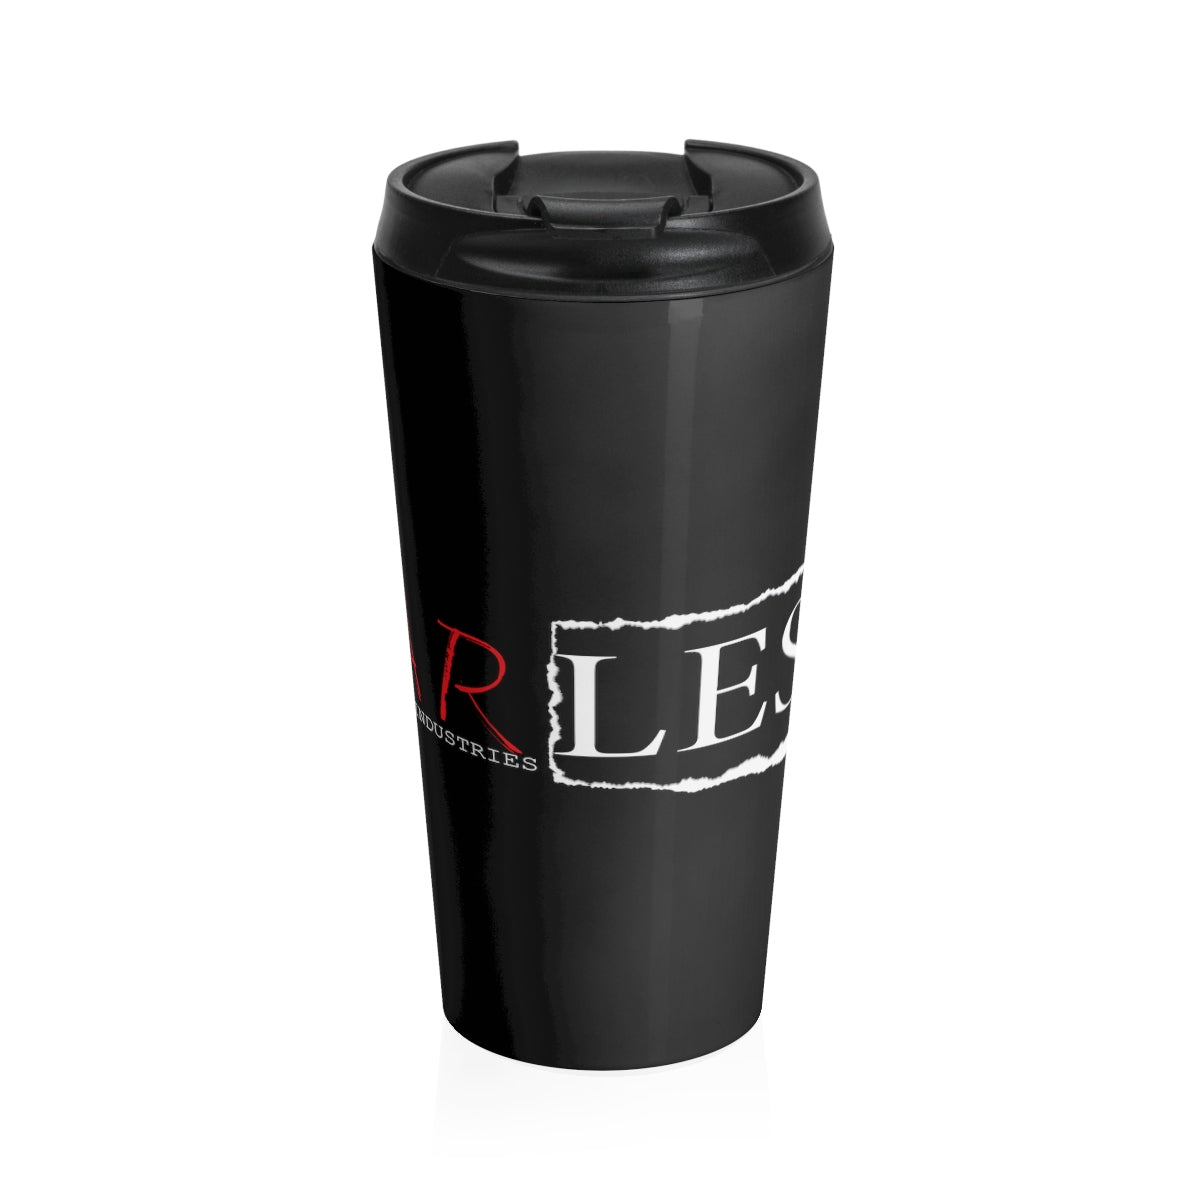 Fearless Ripped/Stainless Steel Travel Mug